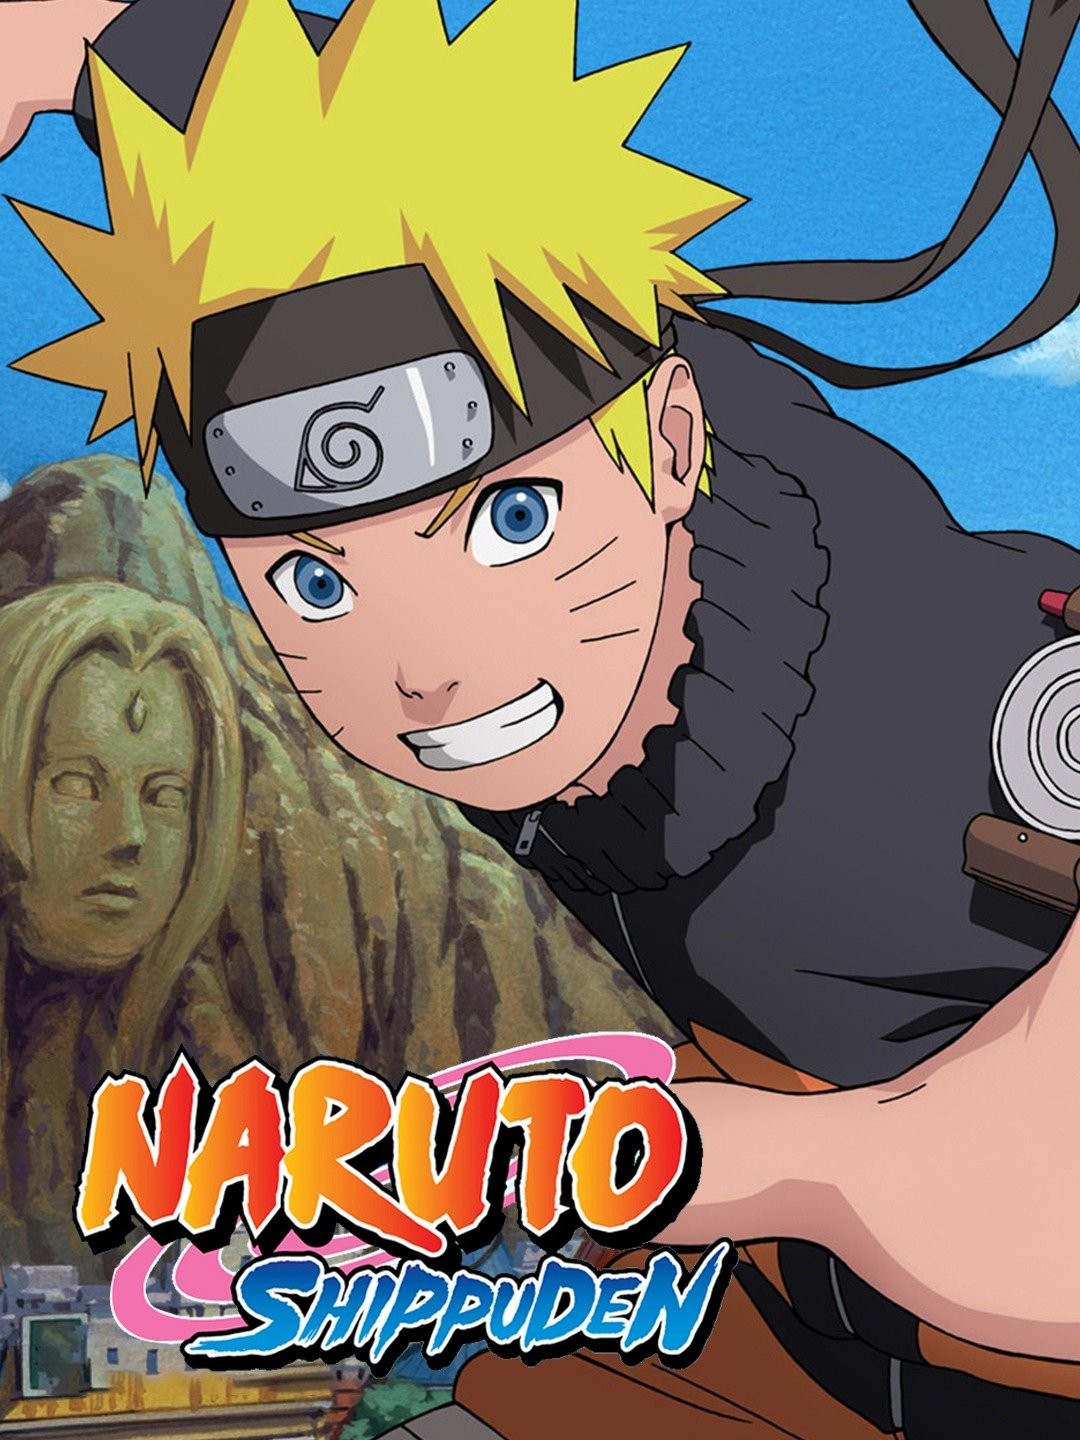 So I Watched the Naruto Top 99 list. 